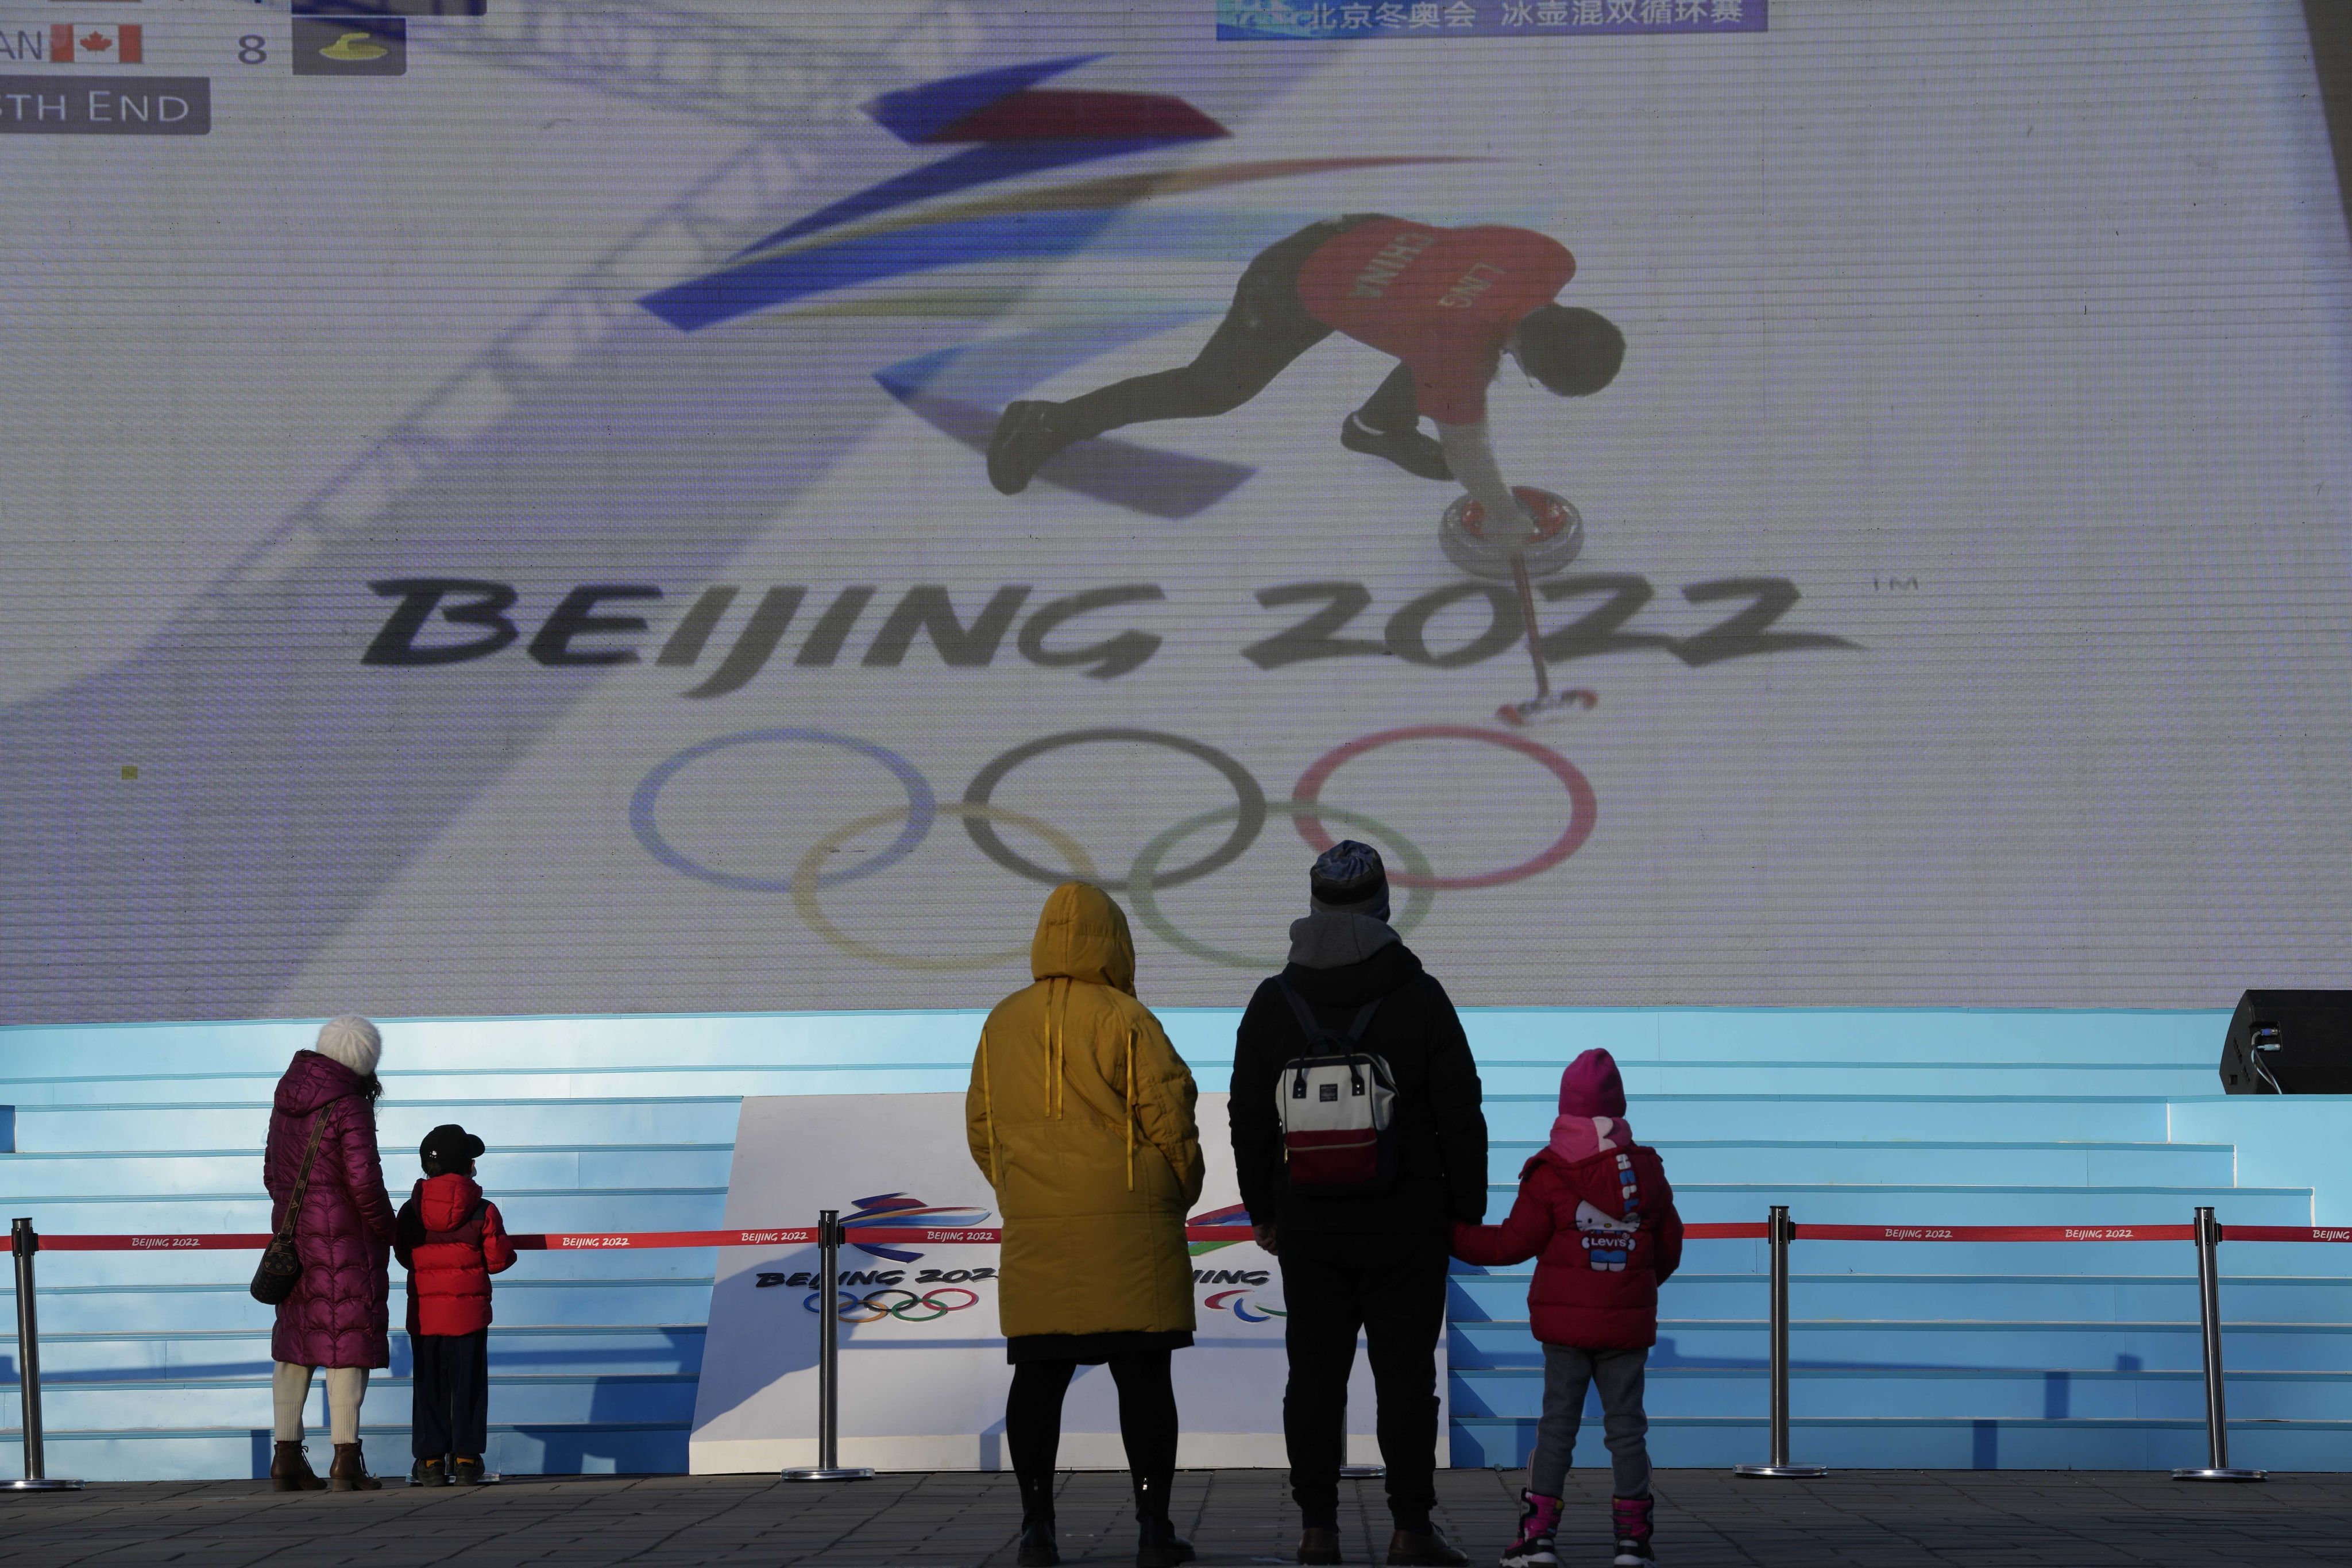 People watch a broadcast of a curling competition, shown on a big screen, during the Beijing 2022 Winter Olympics on February 5, 2022. Photo: AP